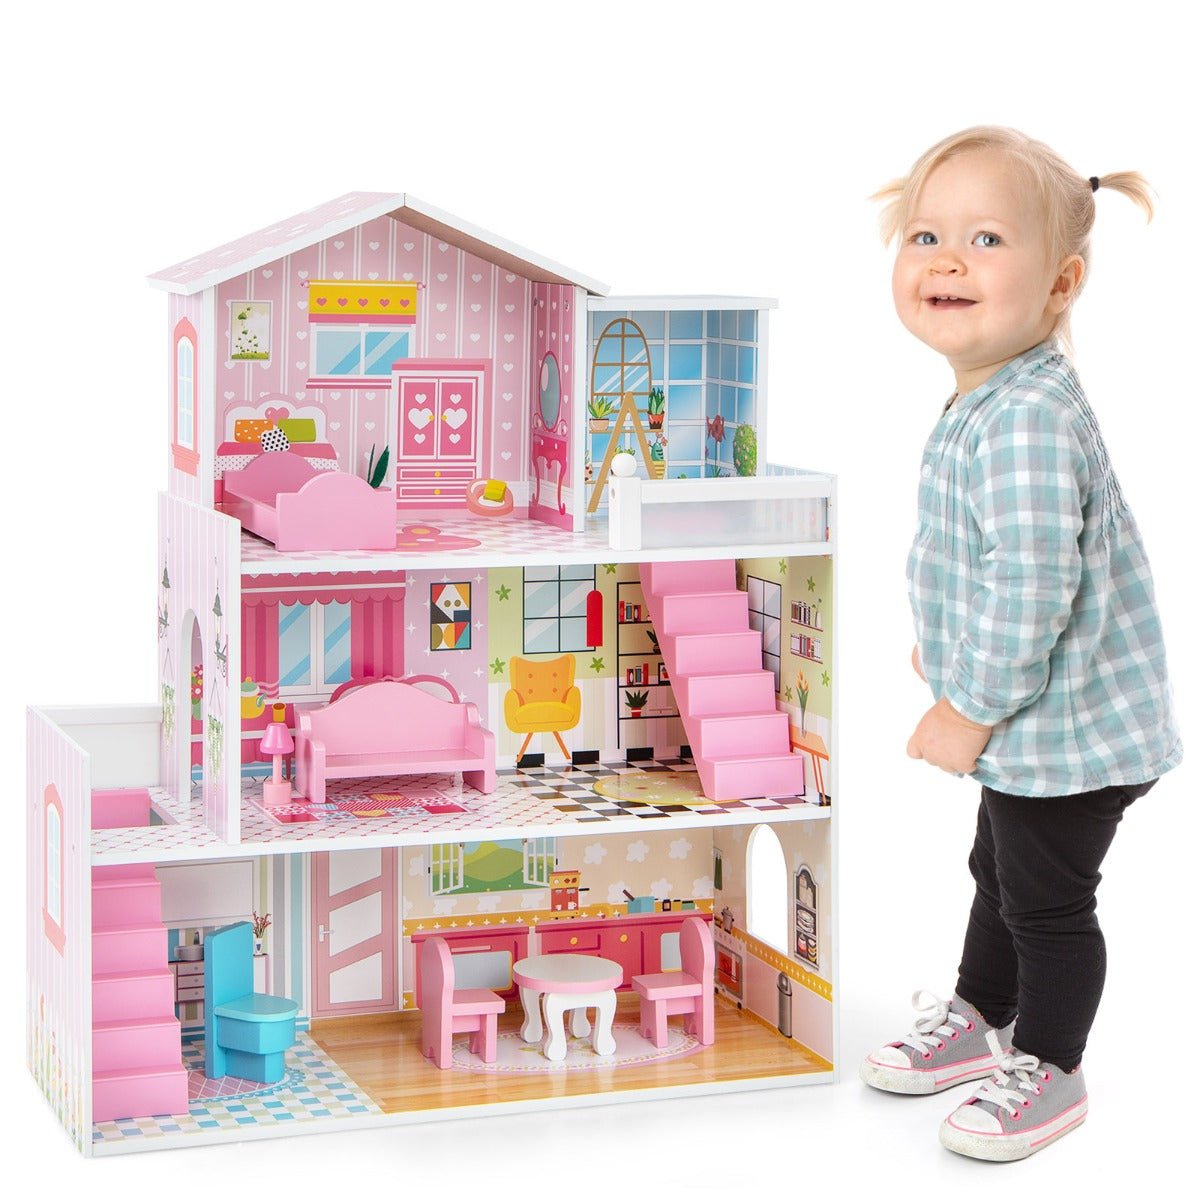 Pink Wooden Dollhouse: Hours of Fun